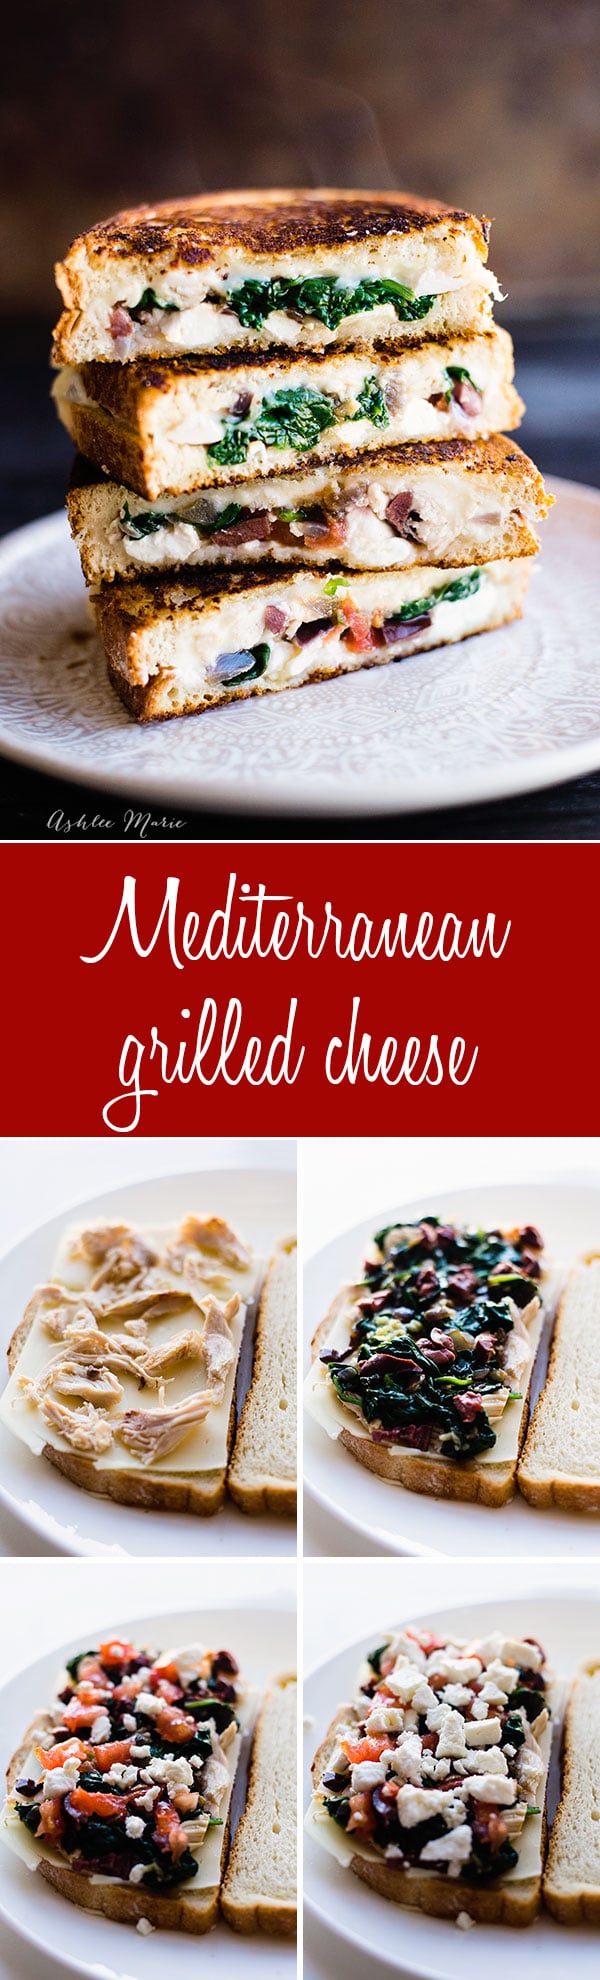 filled with all the flavors of the Mediterranean this grilled cheese is a fun take on a classic sandwhich